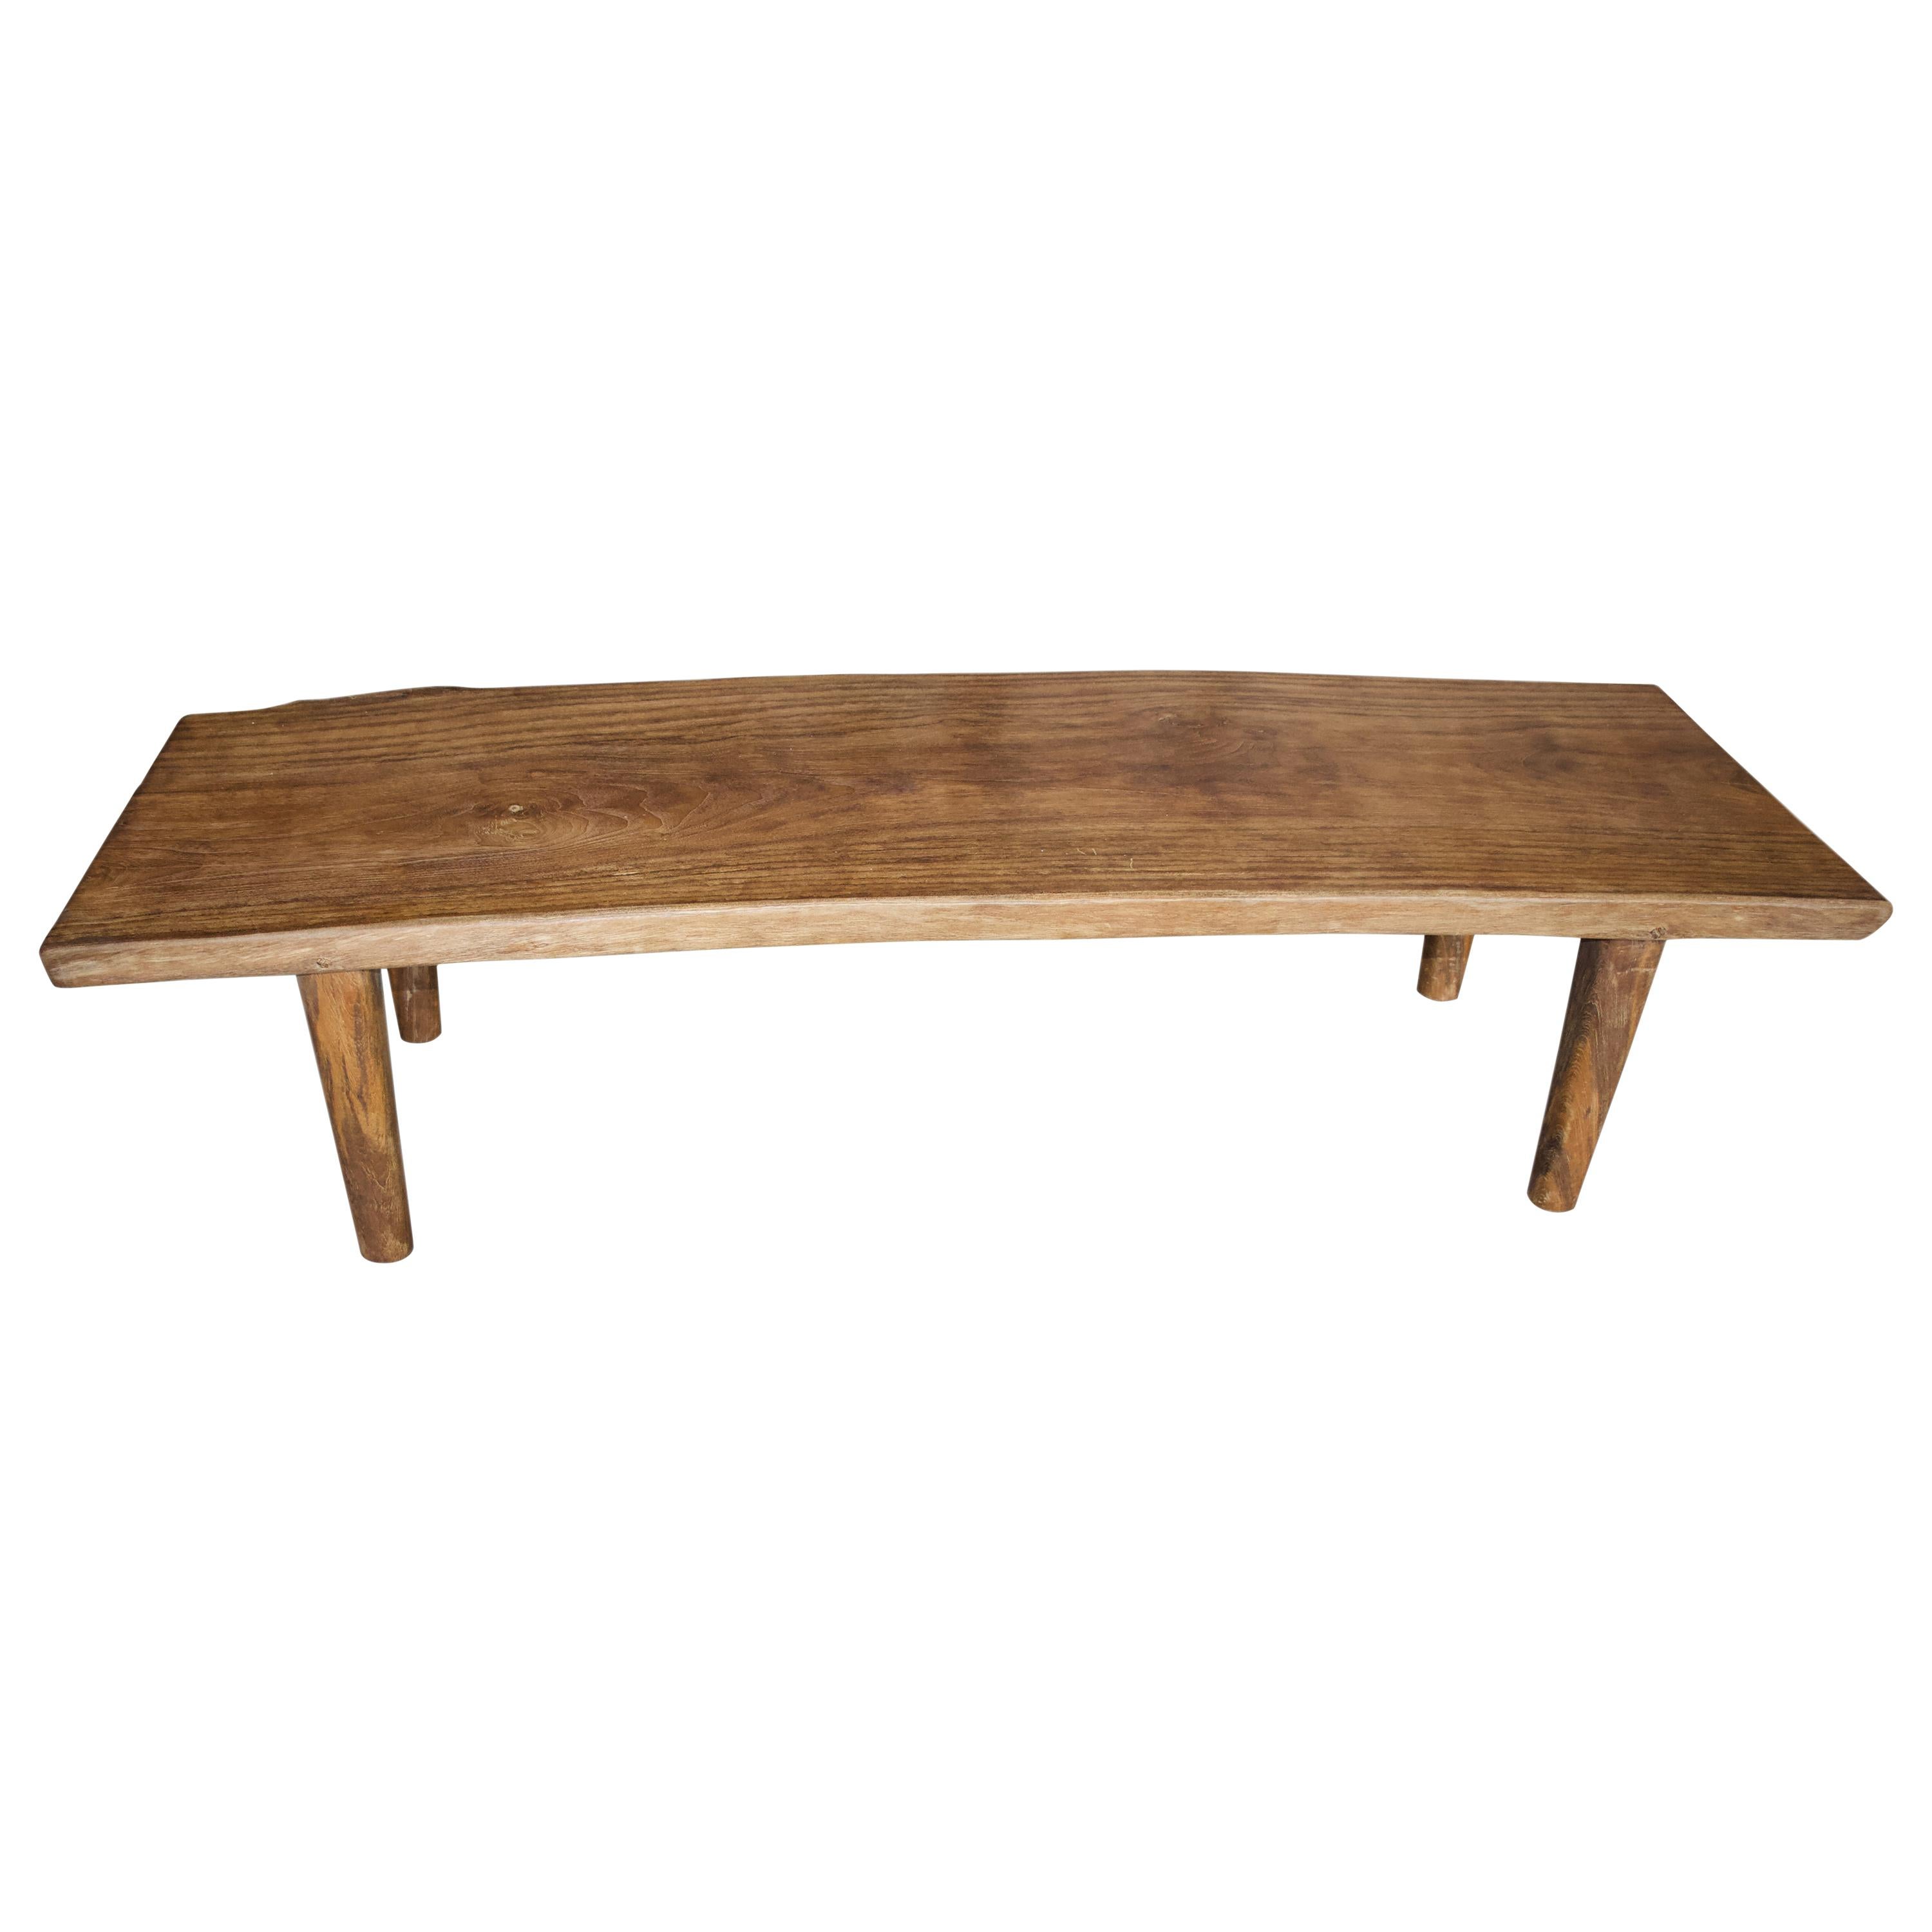 Andrianna Shamaris Midcentury Style Teak Wood Coffee Table or Bench For Sale